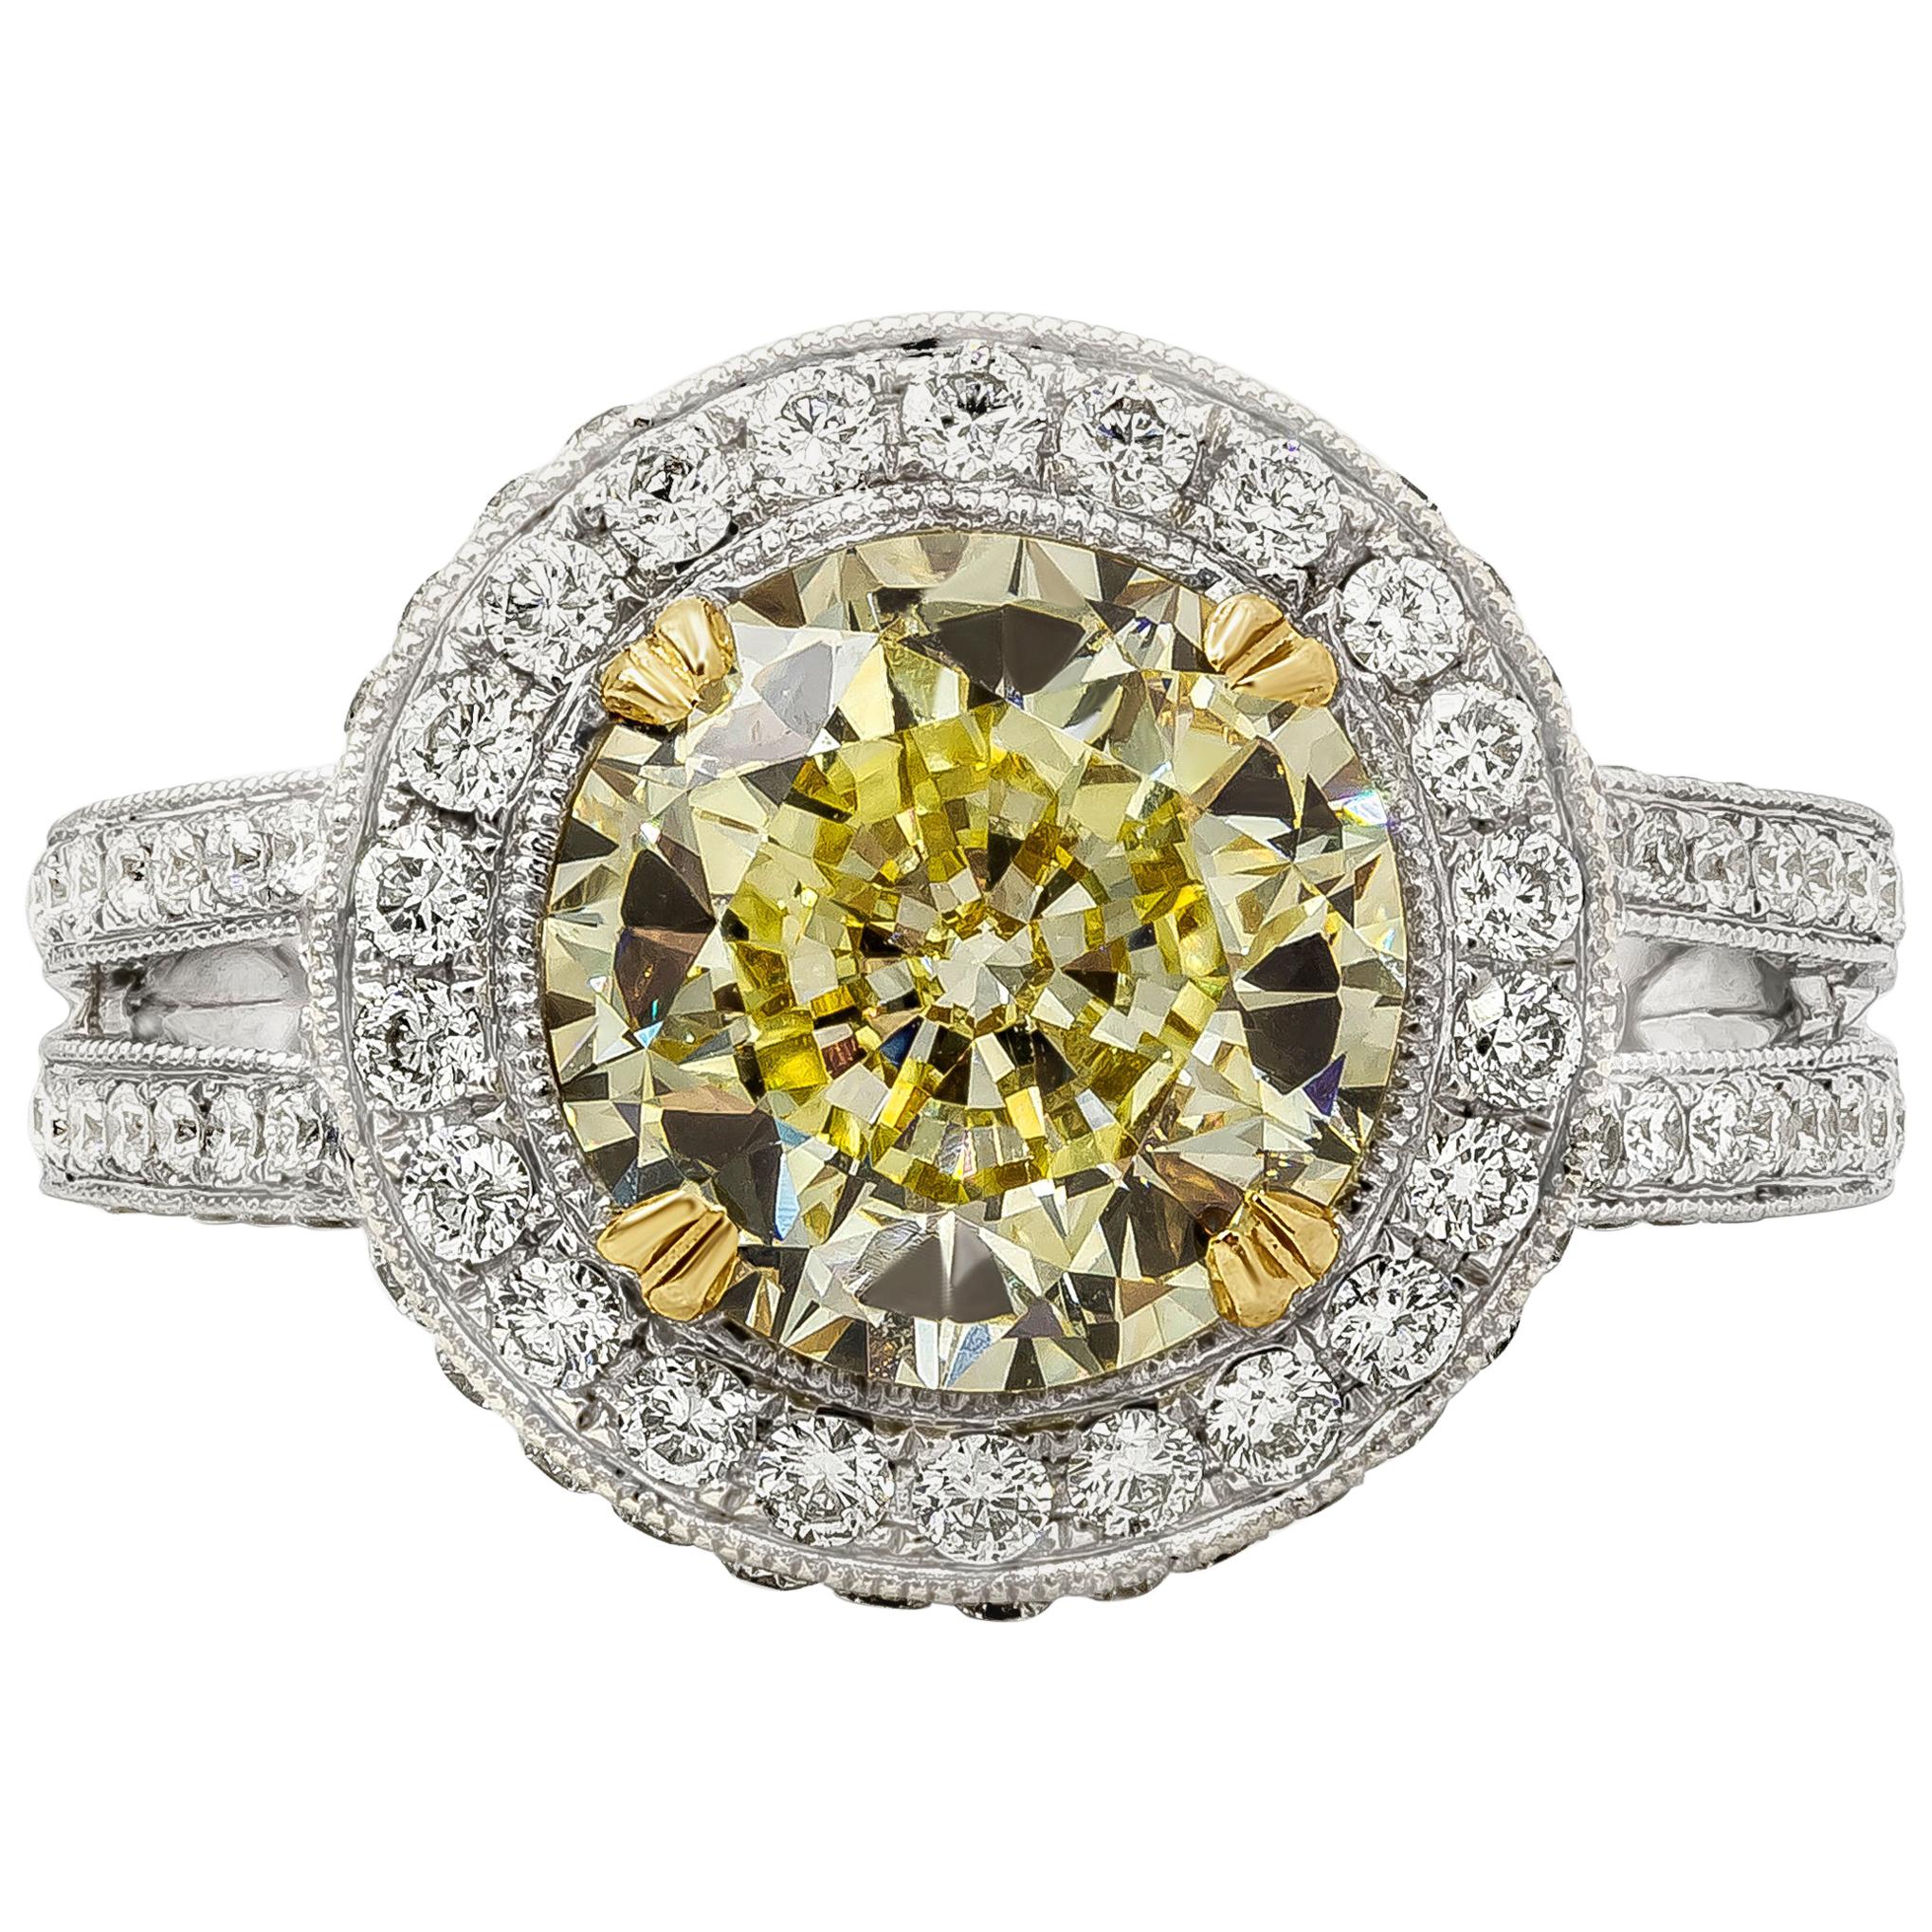 GIA Certified 3.08 Carat Round Yellow Diamond Halo Engagement Ring in White Gold